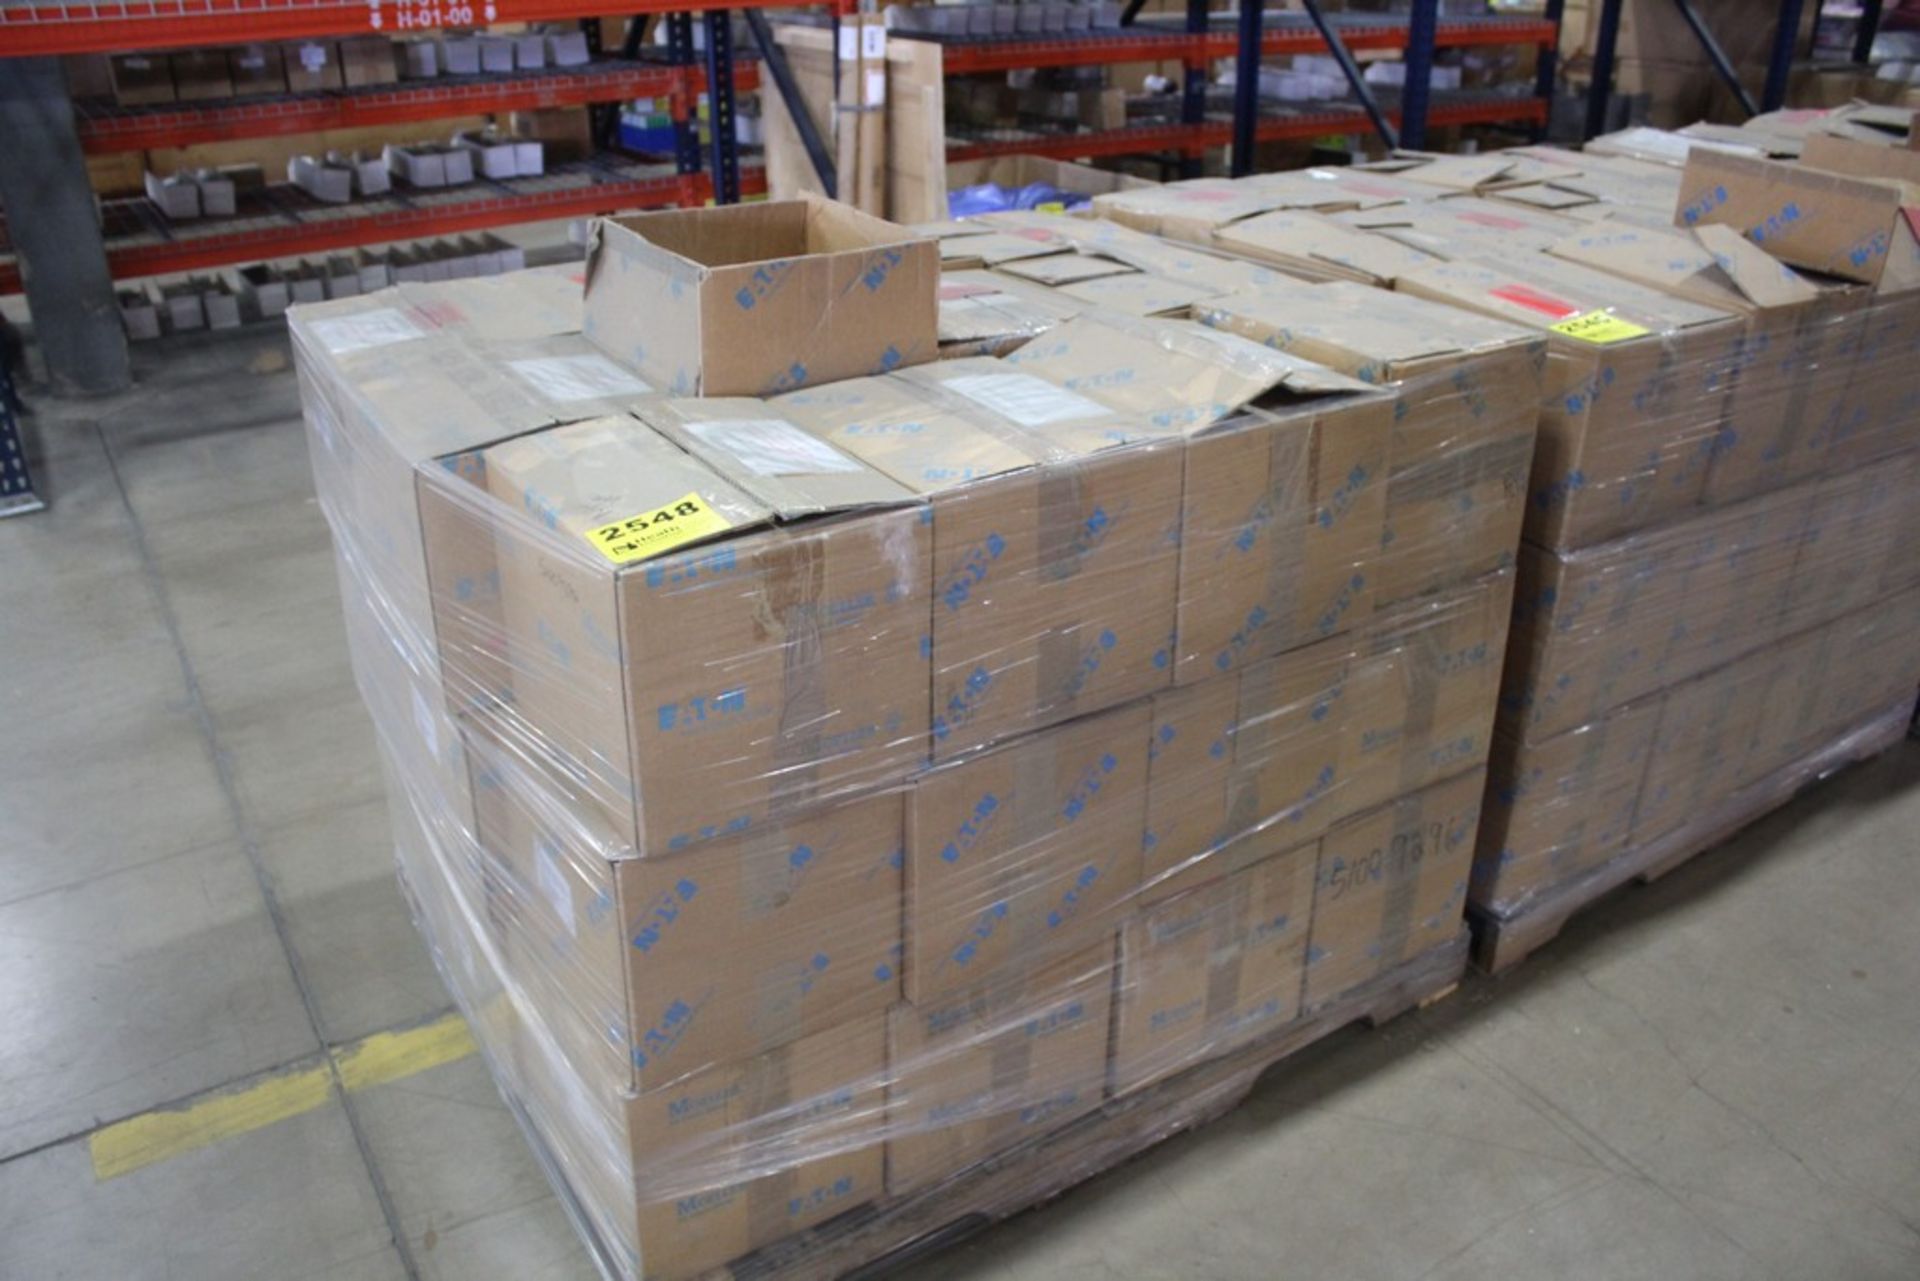 (36) EATON CONTACTORS ON PALLET(OUT OF SERVICE) - Image 2 of 2